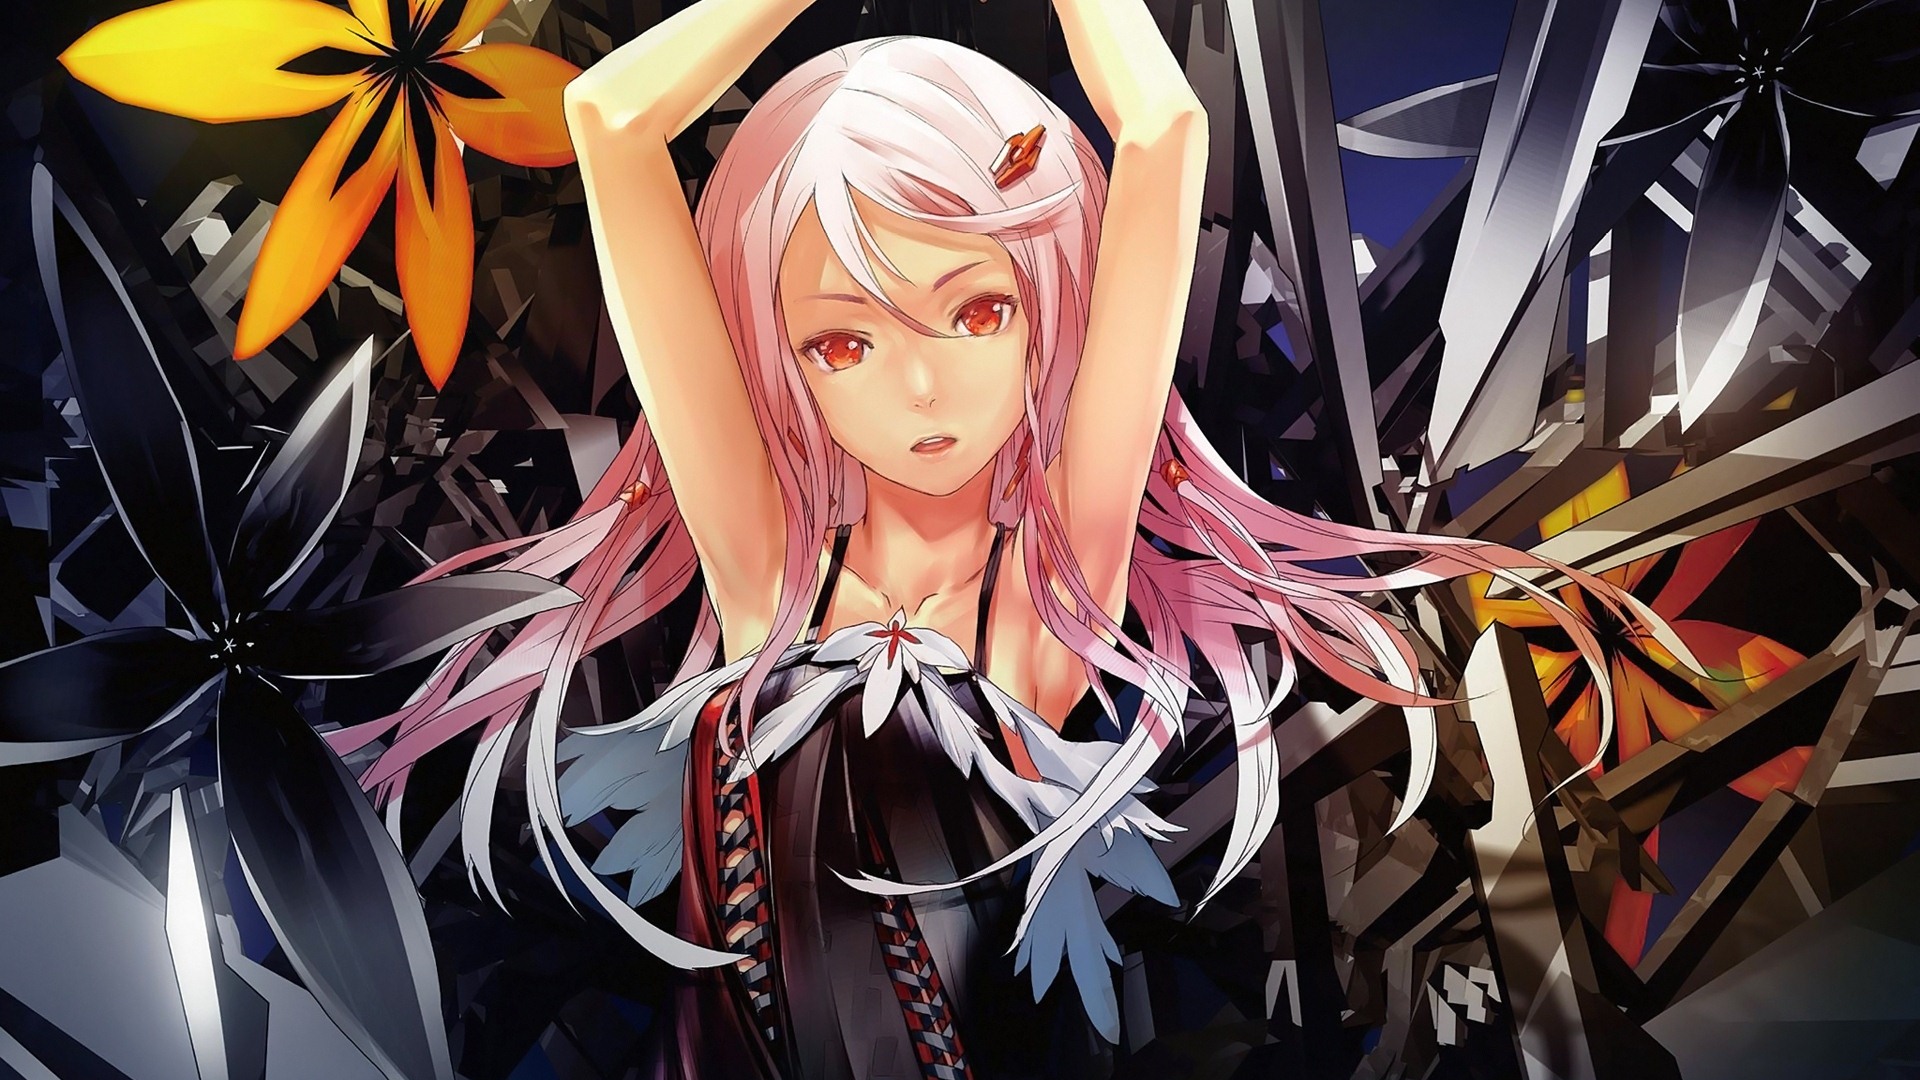 Guilty Crown 罪恶王冠 高清壁纸1 - 1920x1080